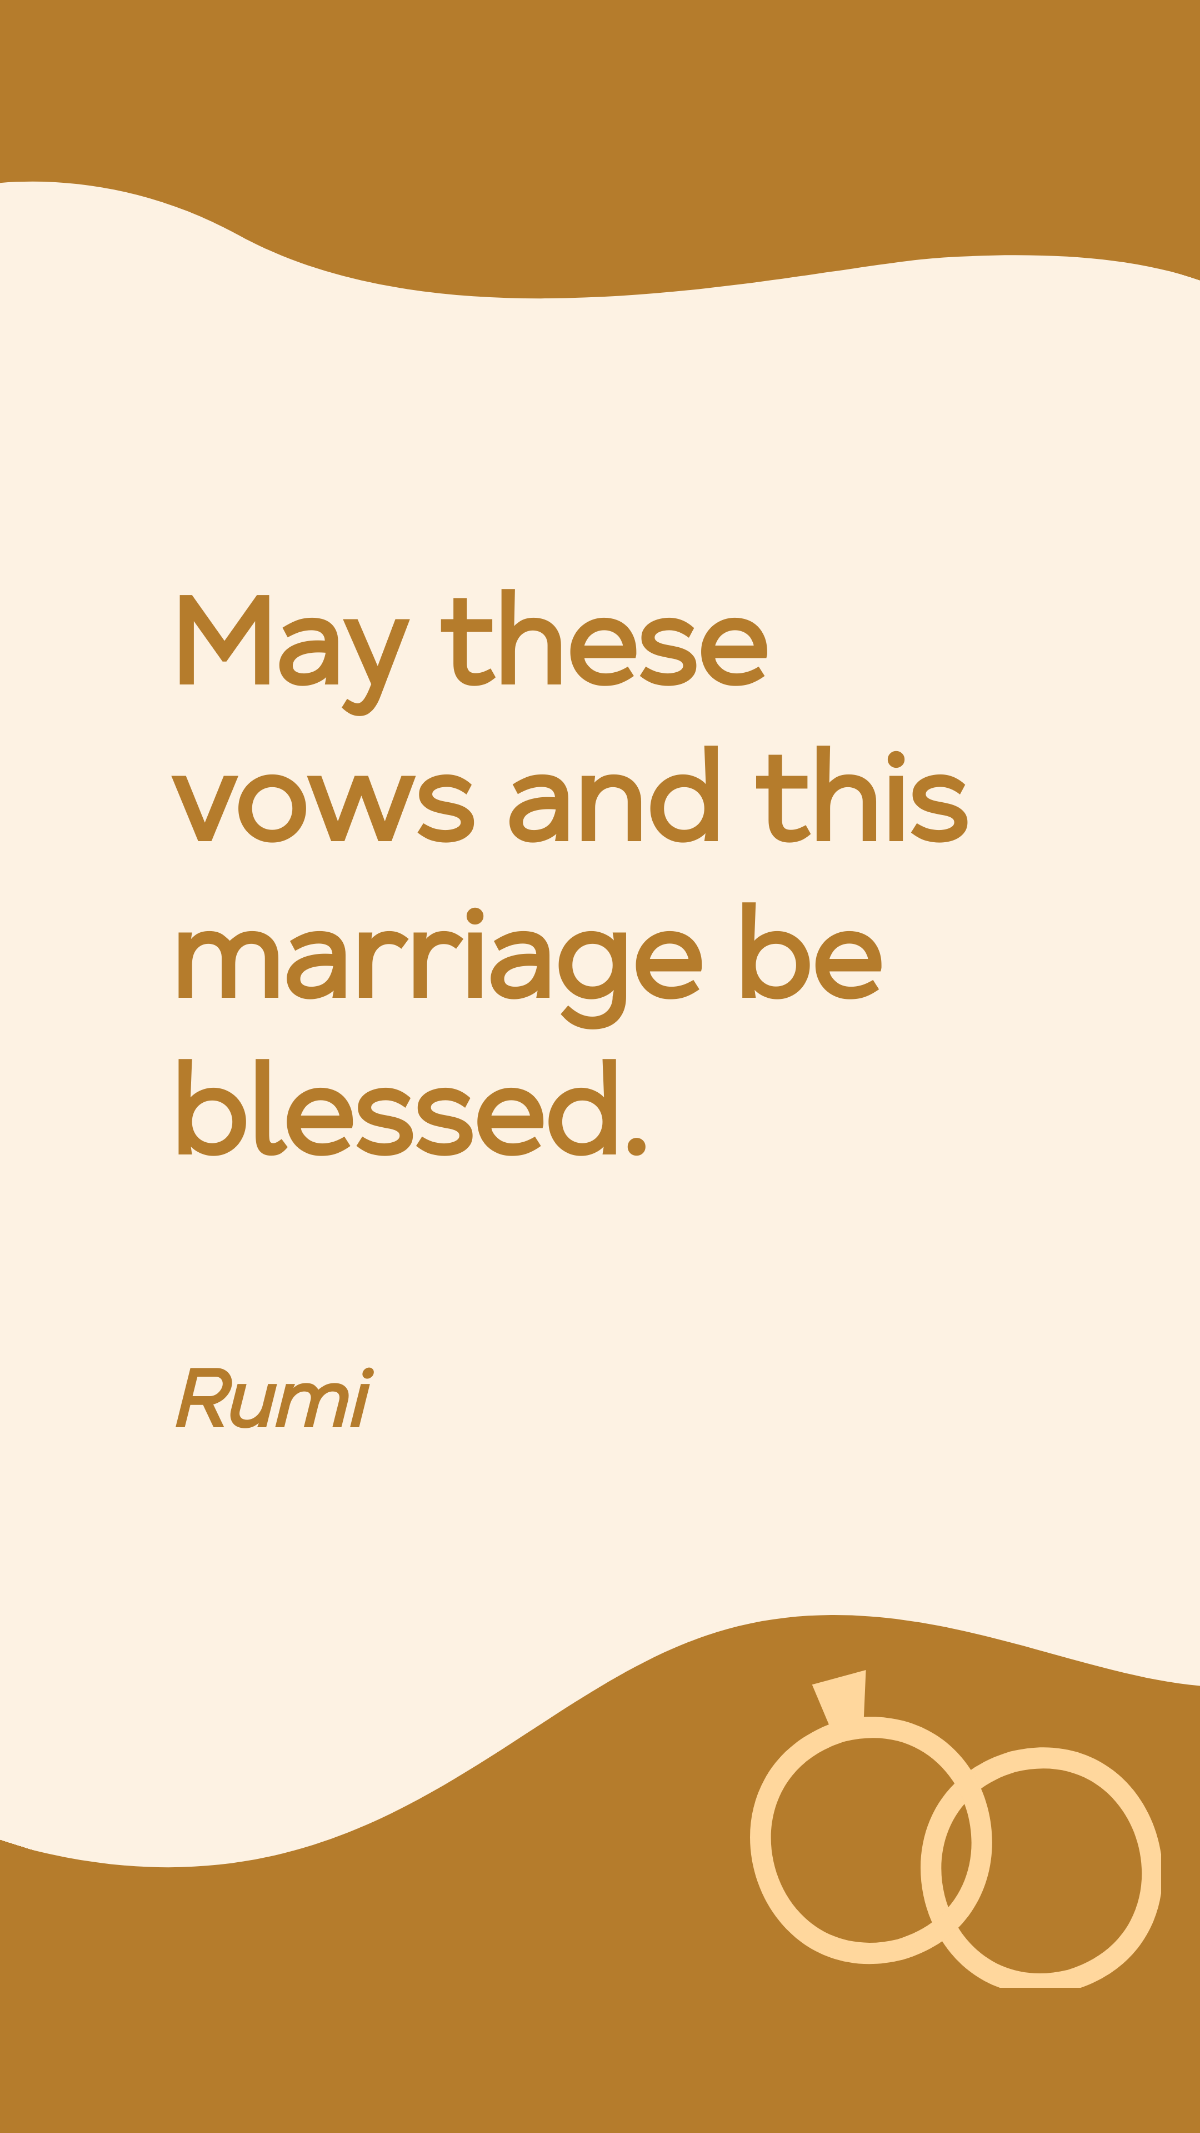 Free Rumi - May these vows and this marriage be blessed. Template